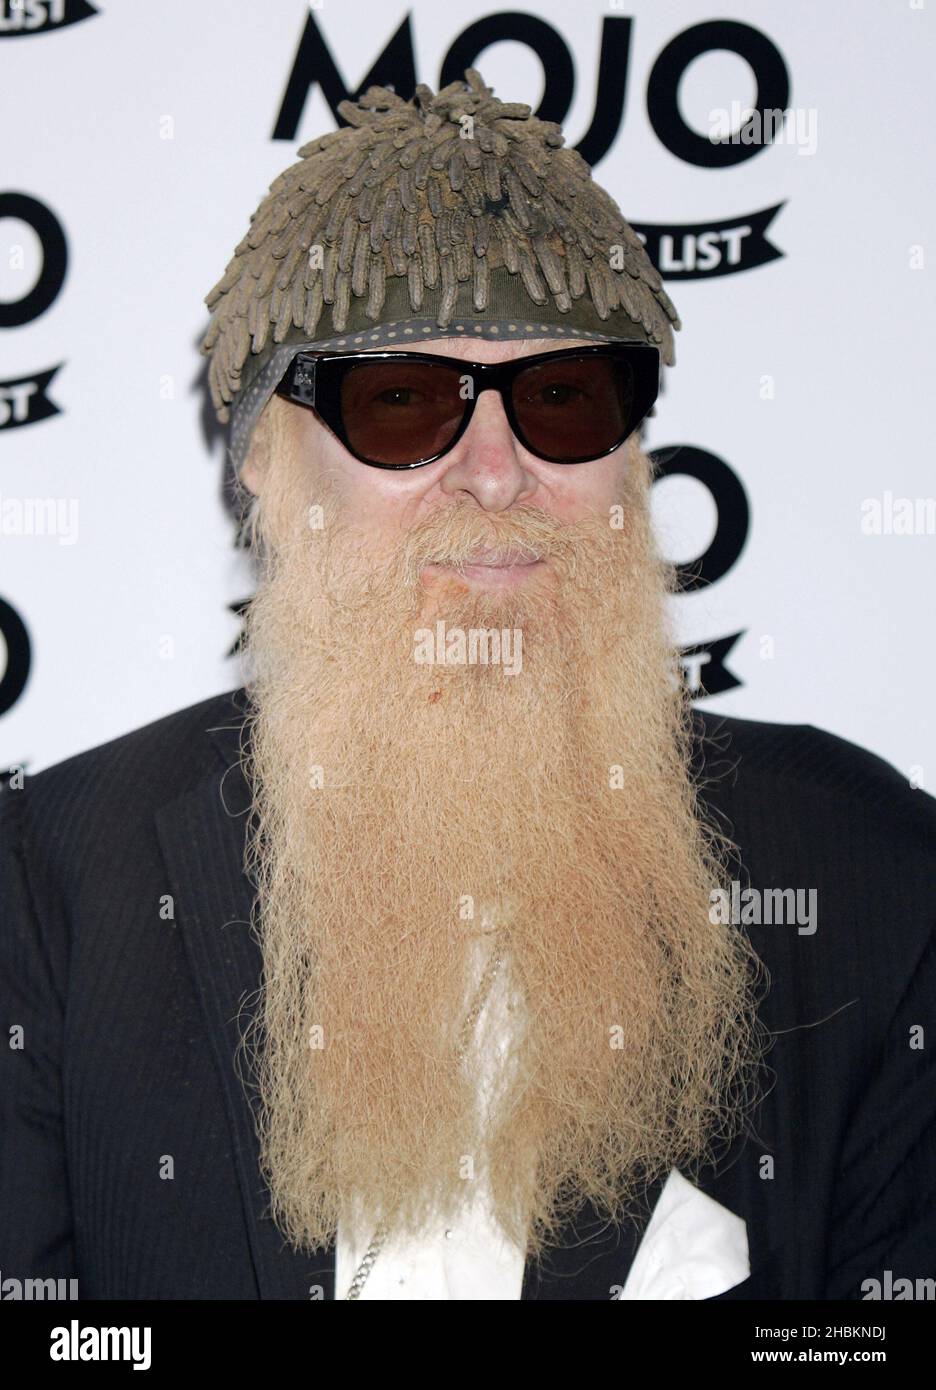 Billy Gibbons of ZZ Top arrives at the MOJO Awards at The Brewery in London. Stock Photo